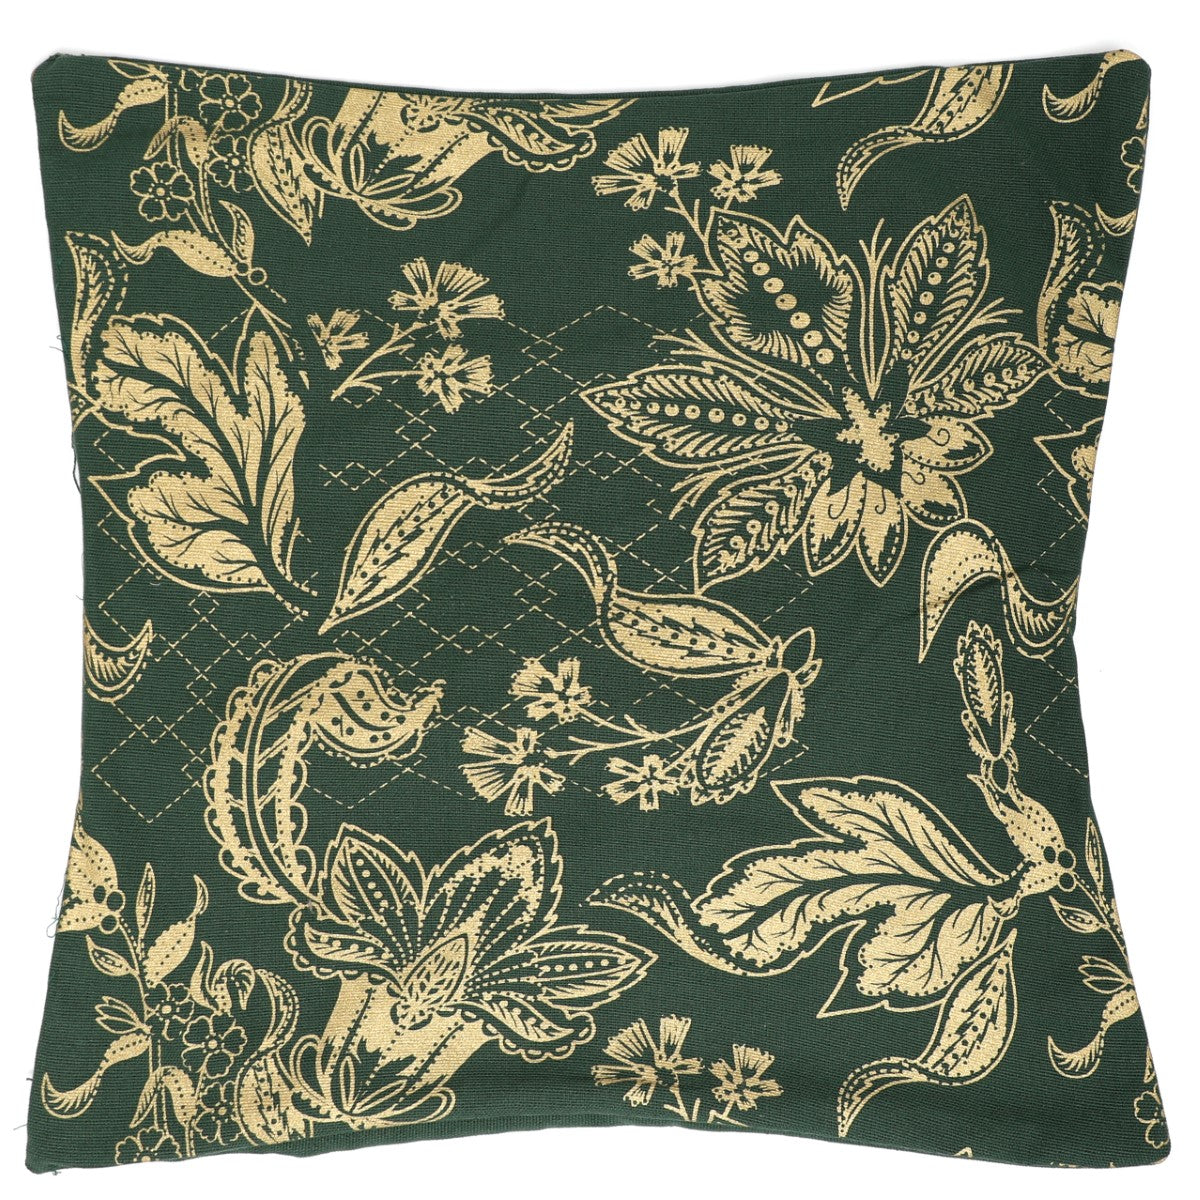 Emerald Green Gold Jaal Cushion Cover 18x18"